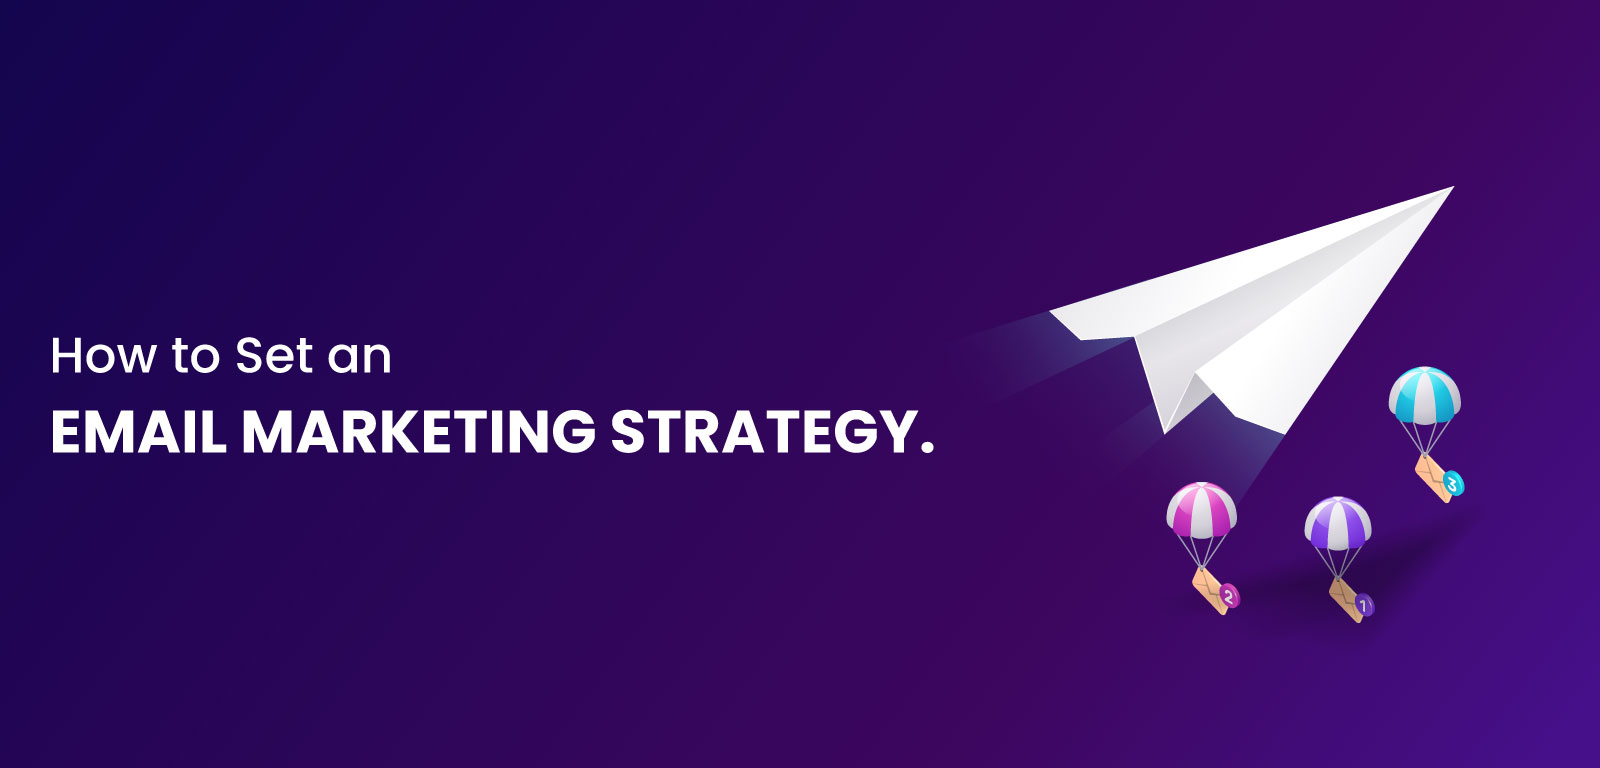 How to set an email marketing strategy?